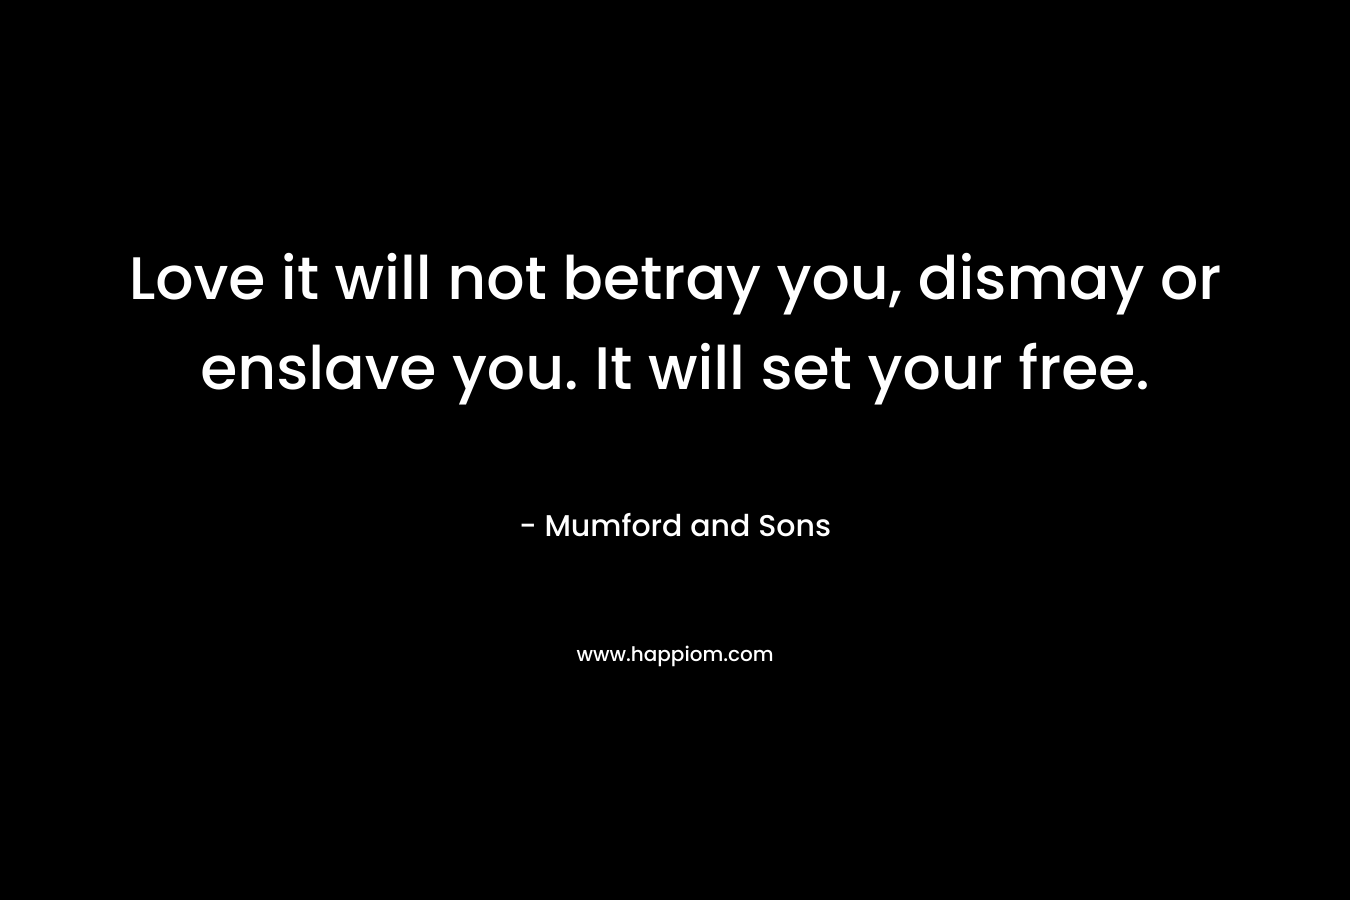 Love it will not betray you, dismay or enslave you. It will set your free.